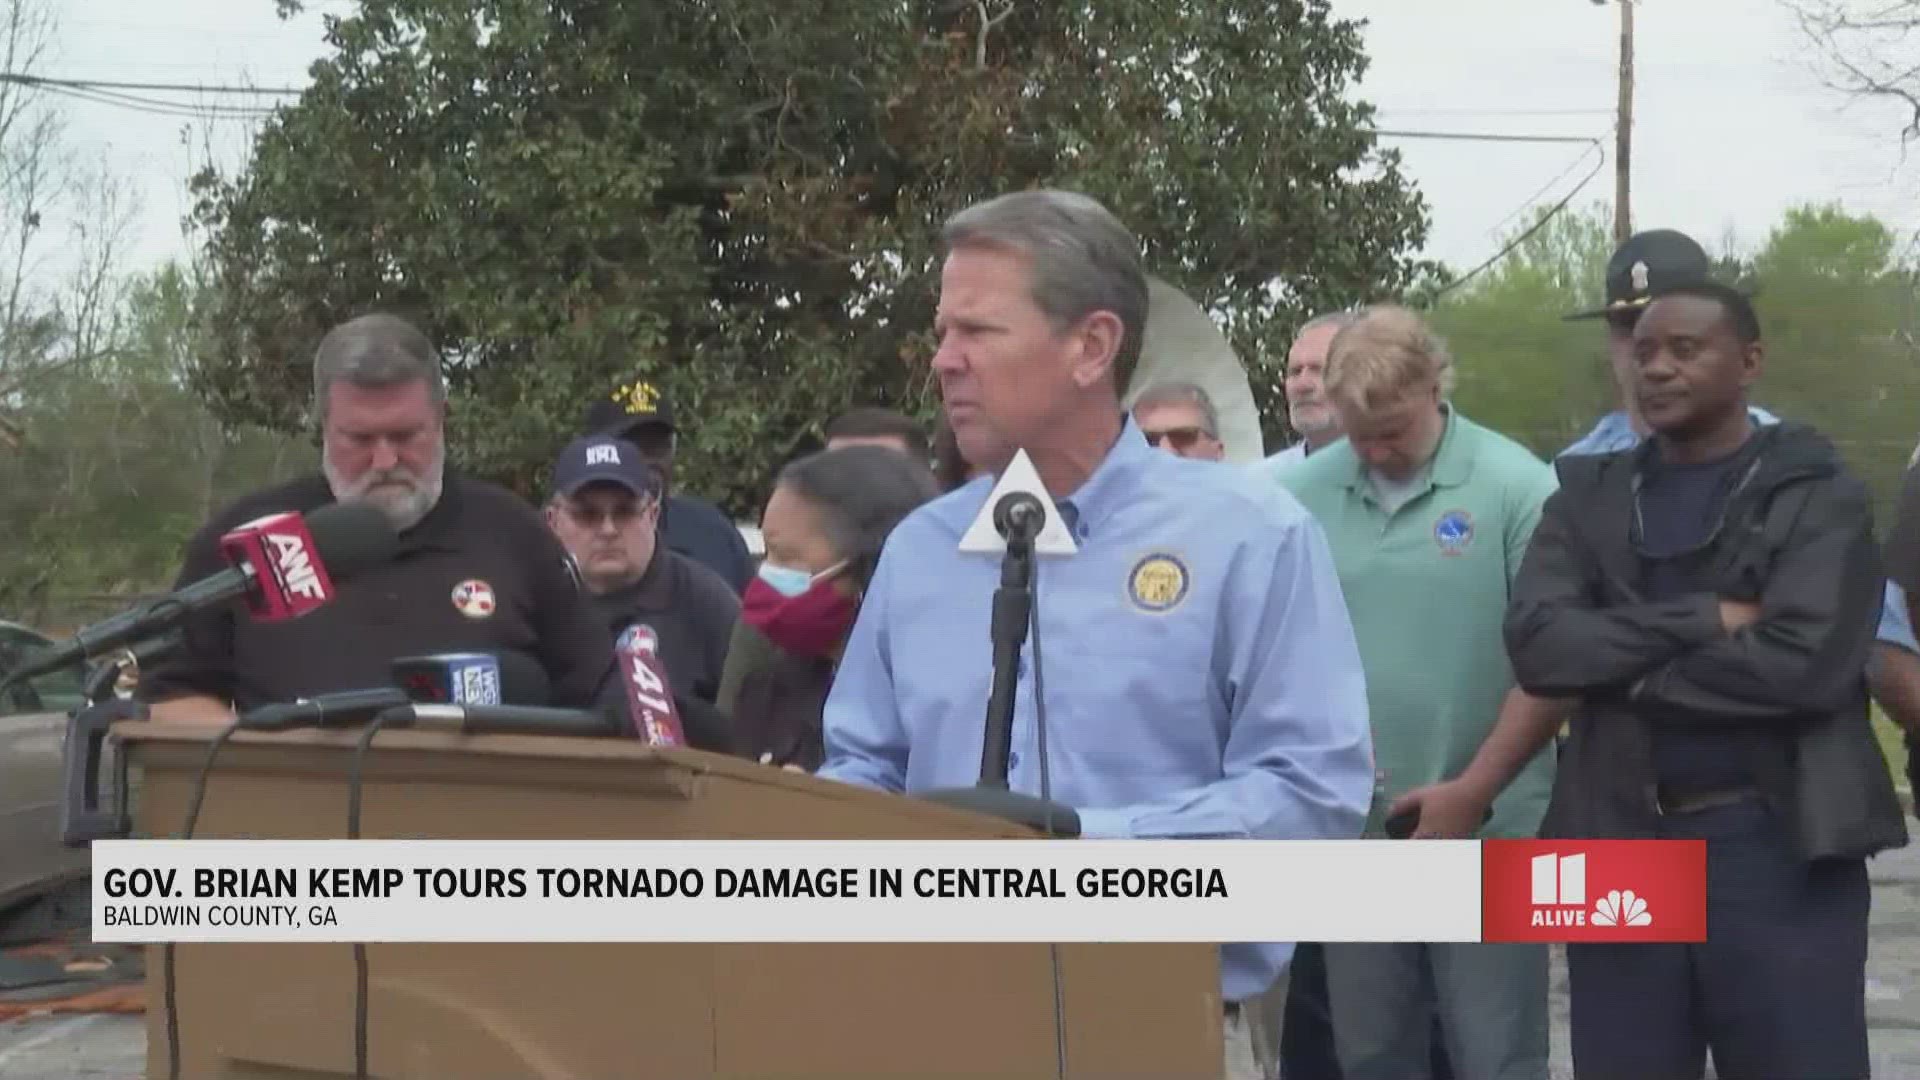 Following a tour of Baldwin County in the Milledgeville area, Kemp spoke with reporters.